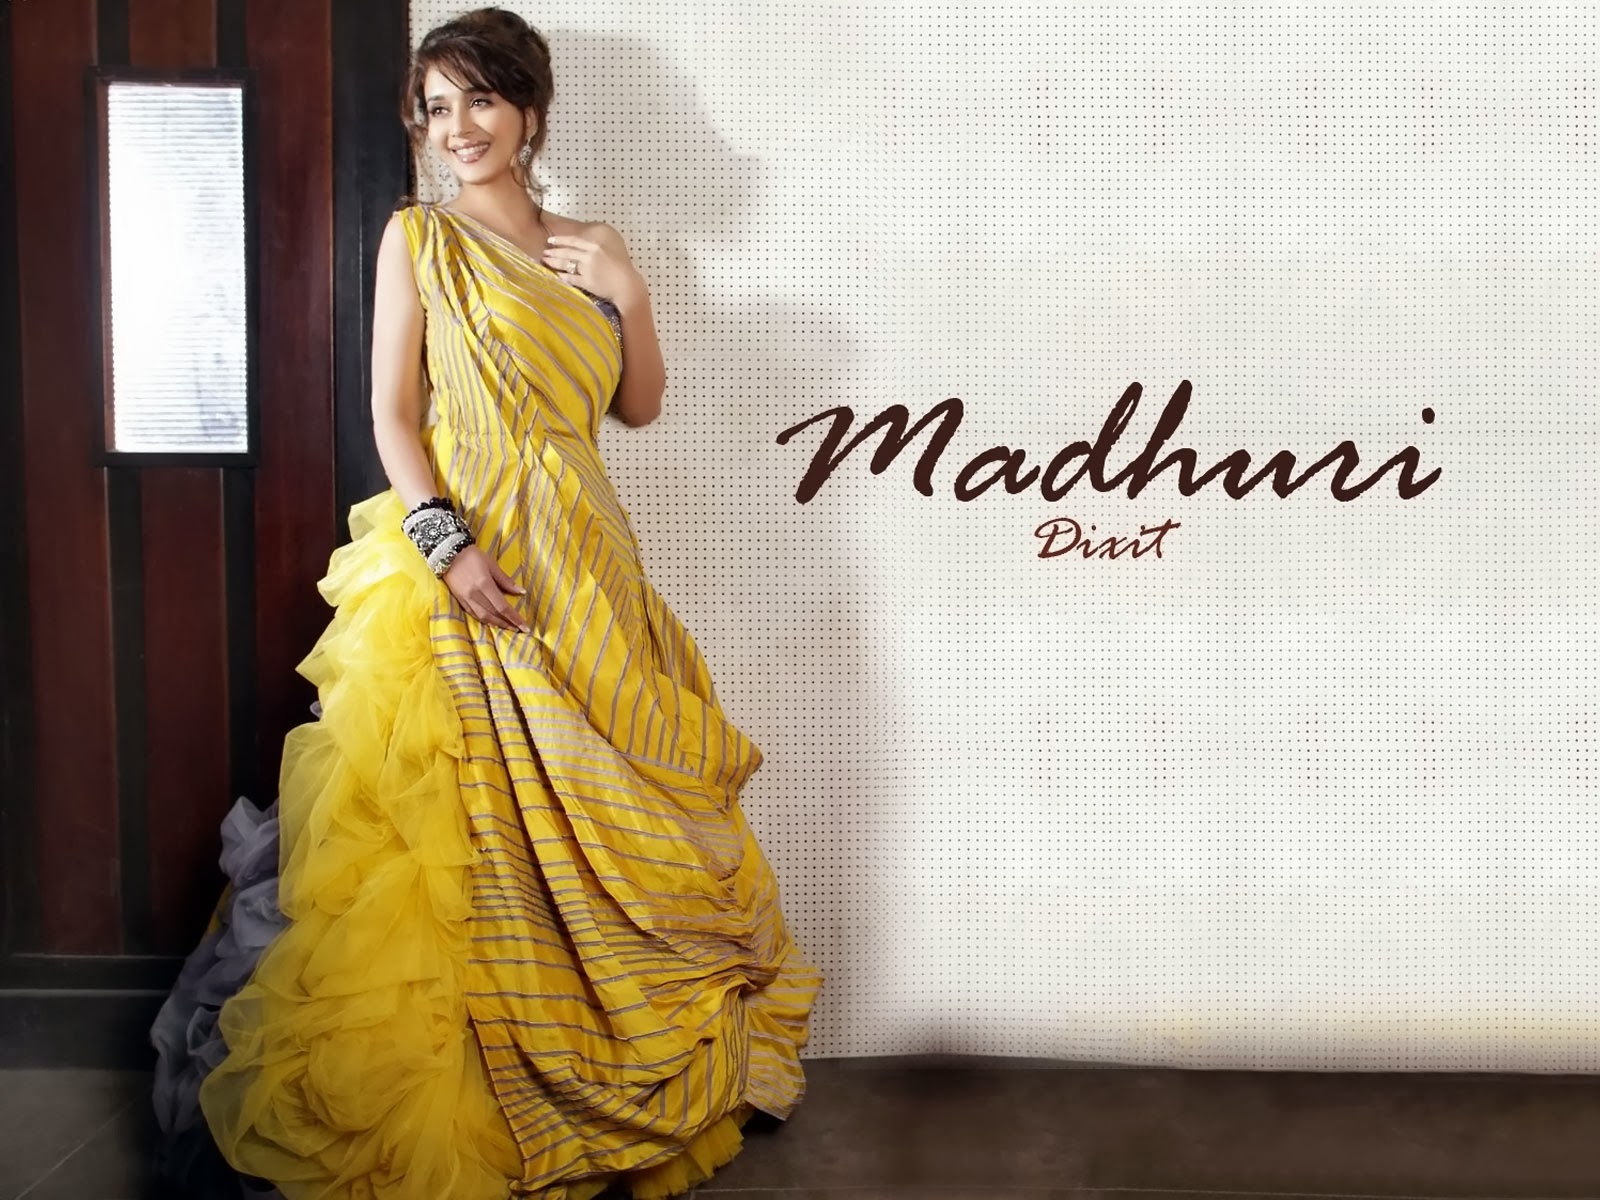 Missing Beats Of Life Bollywood Actress Madhuri Dixit Hd Wallpapers And Images 